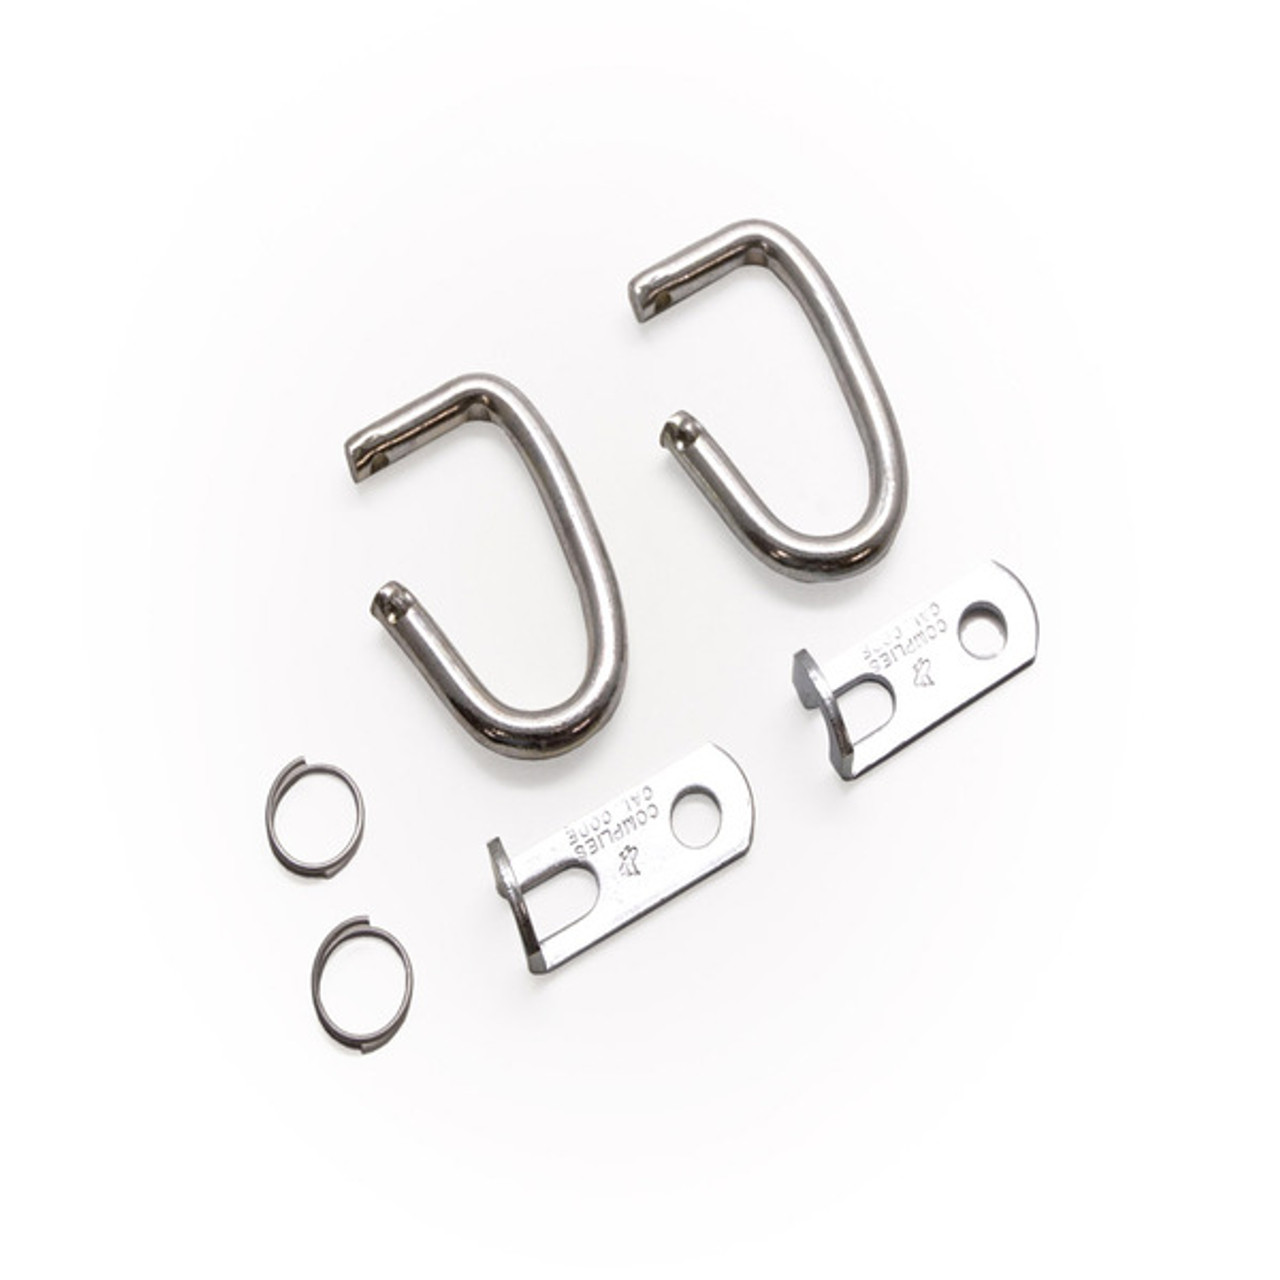 Replacement C-Hook for Plug-End Extension Springs on Single-Panel